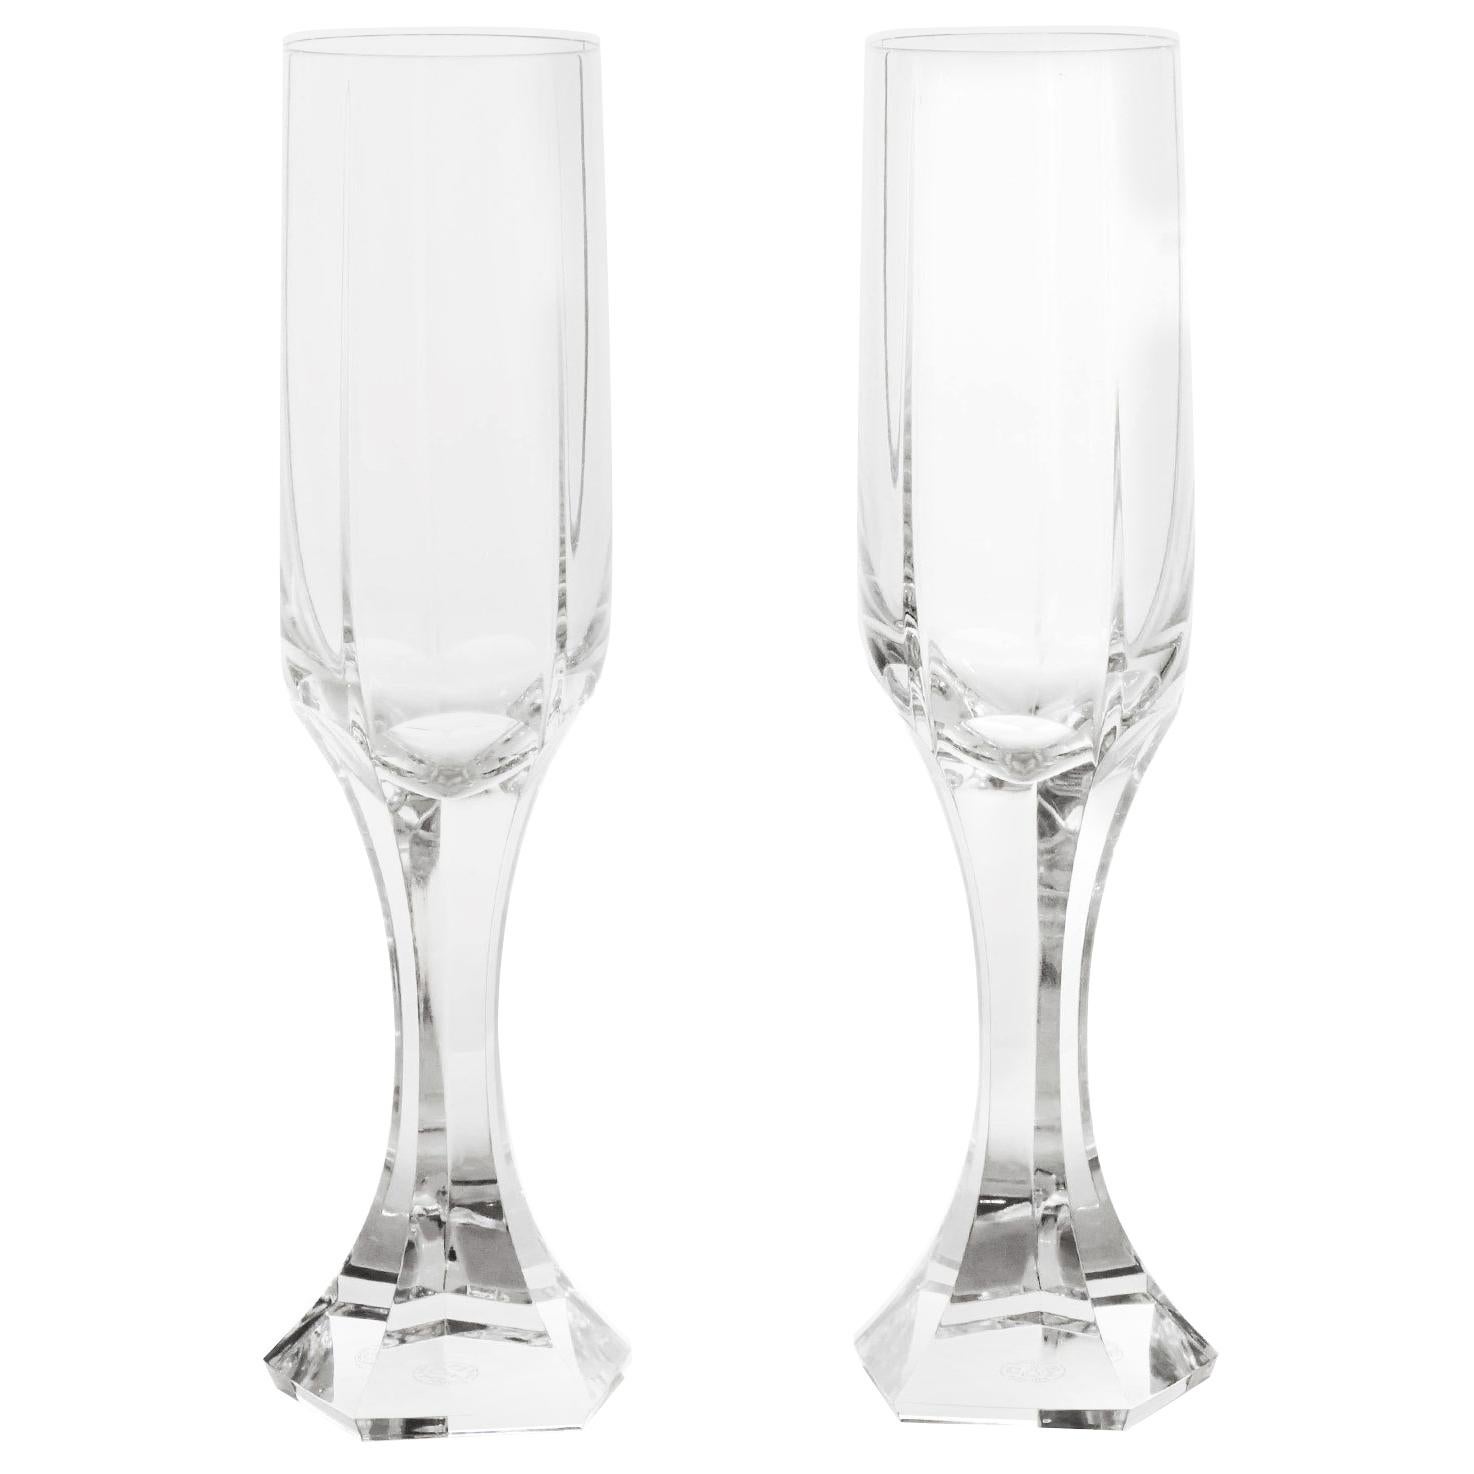 12 Baccarat "Mercure" Fluted Champagne Glasses